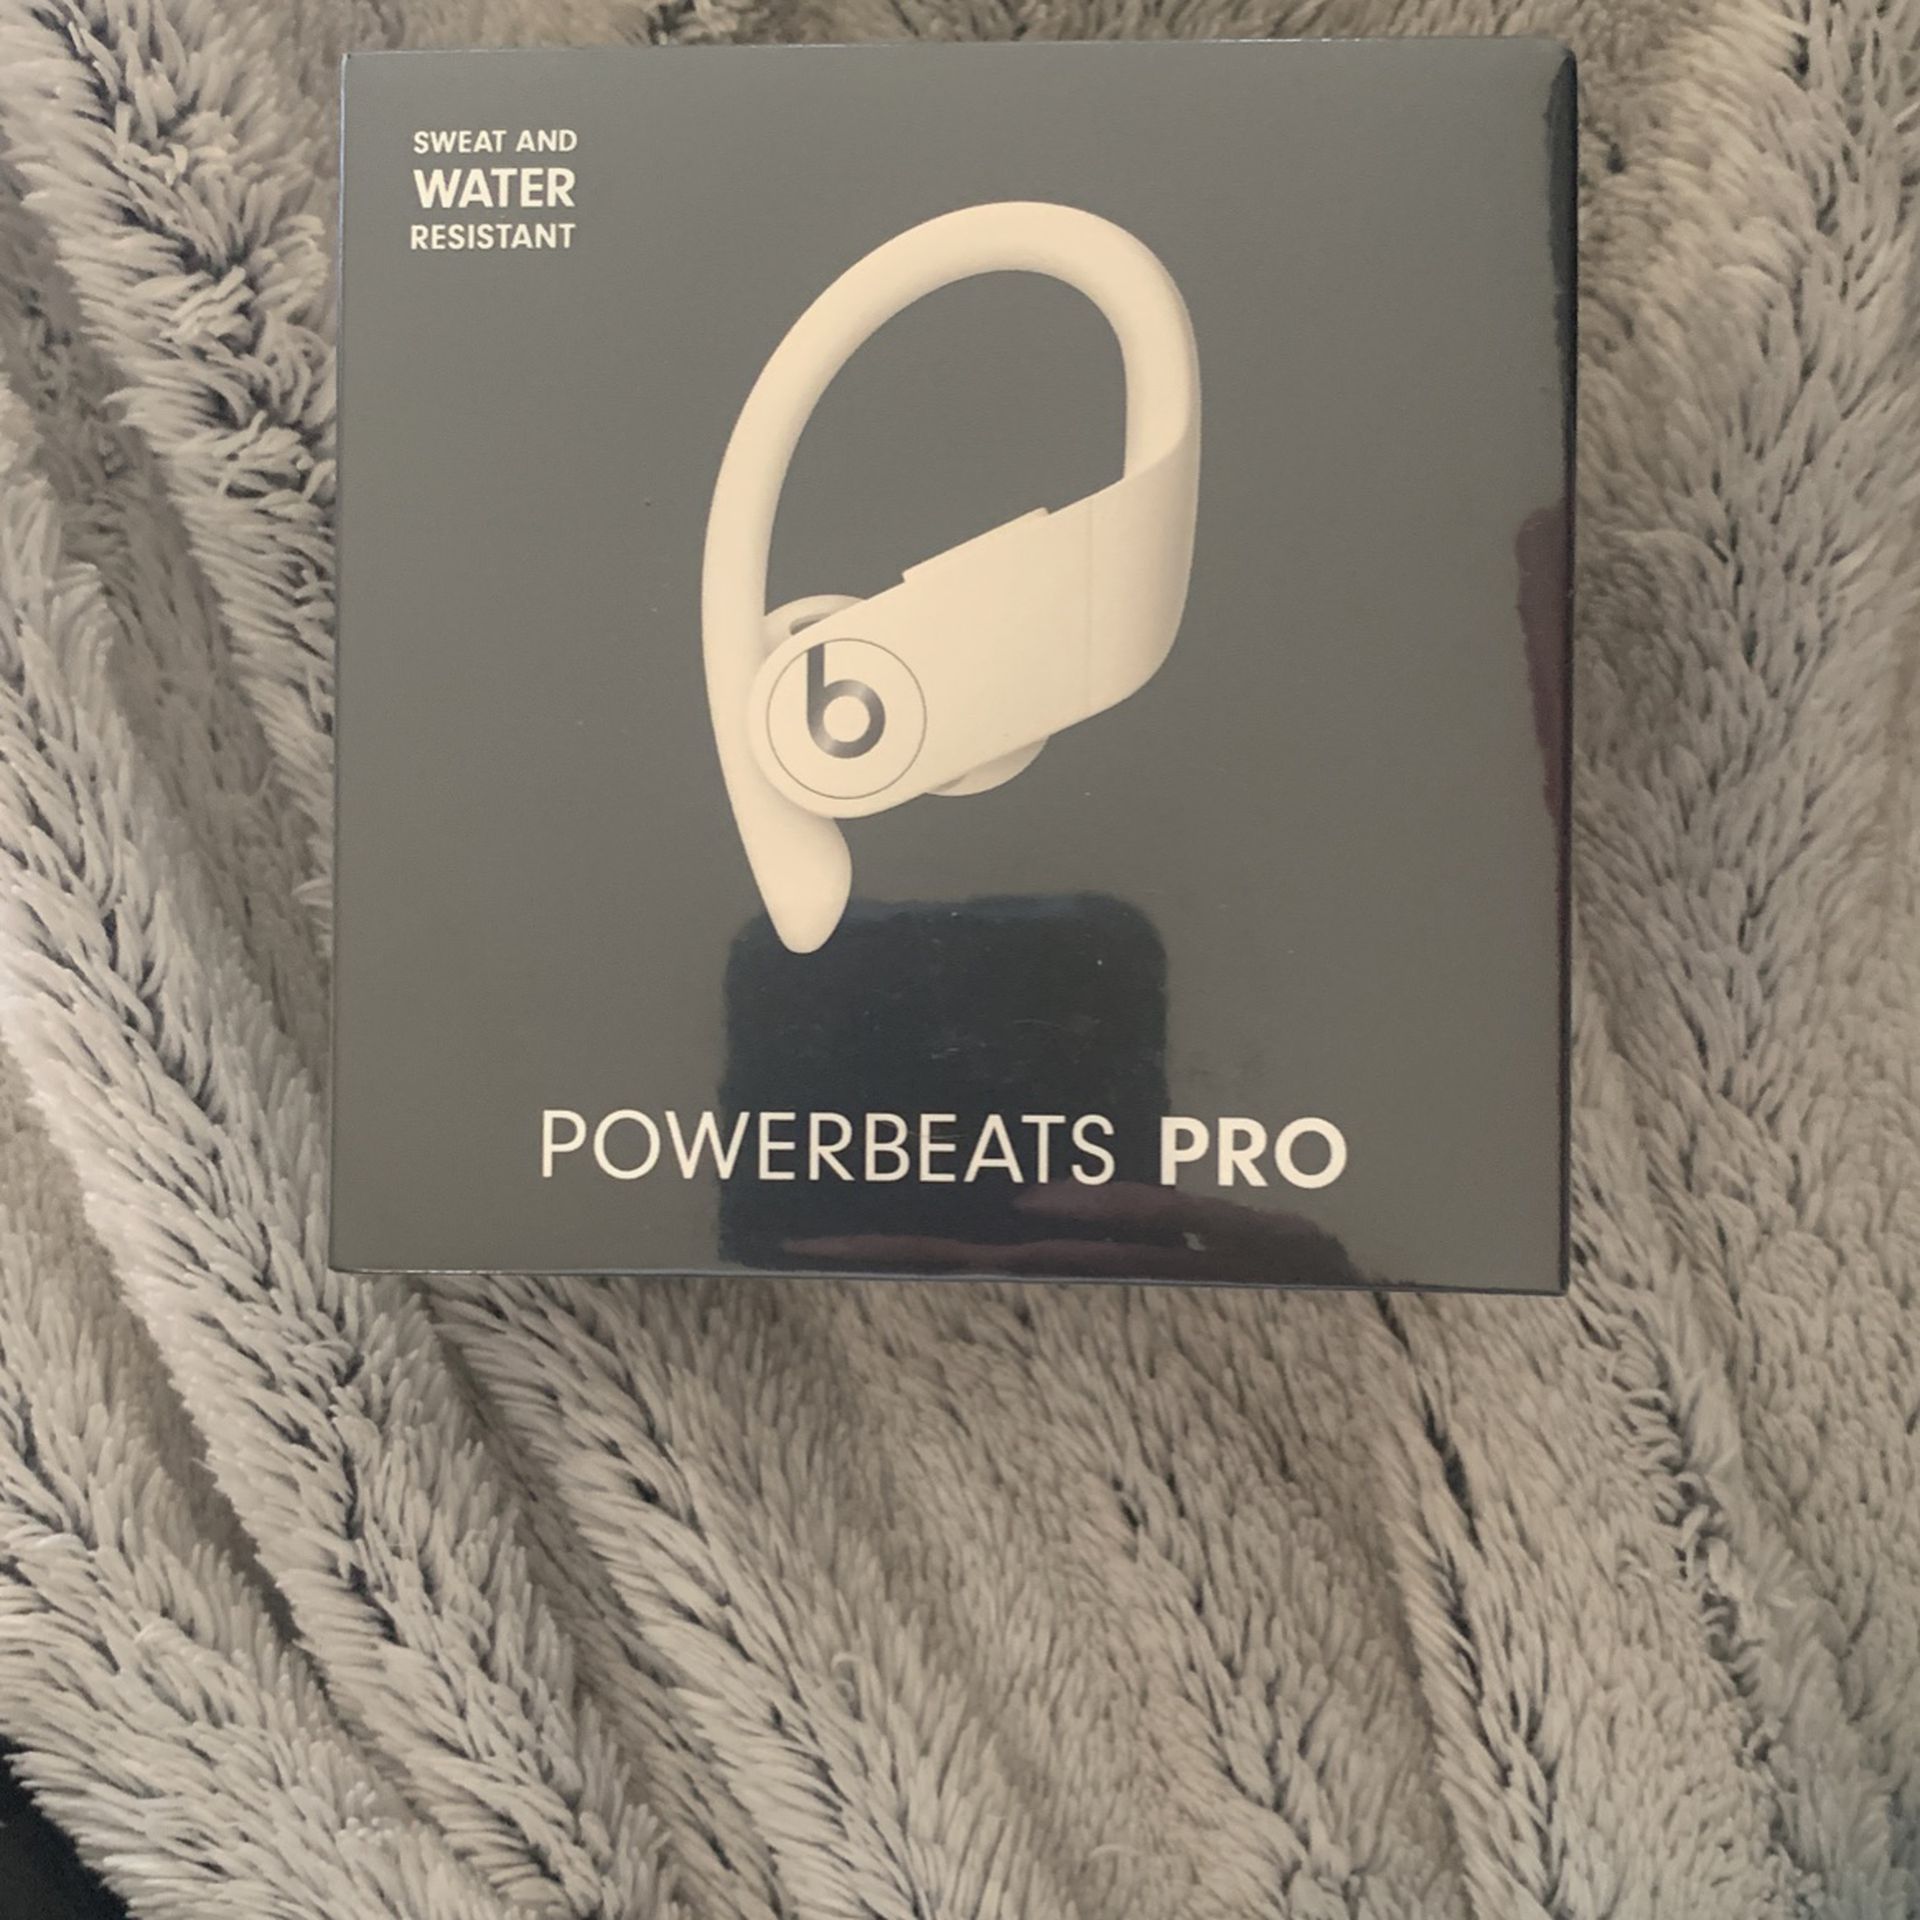 NEW SEALED POWERBEATS PRO WHITE WIRELESS HIGH PERFORMANCE BLUETOOTH EARBUDS EARPHONES 